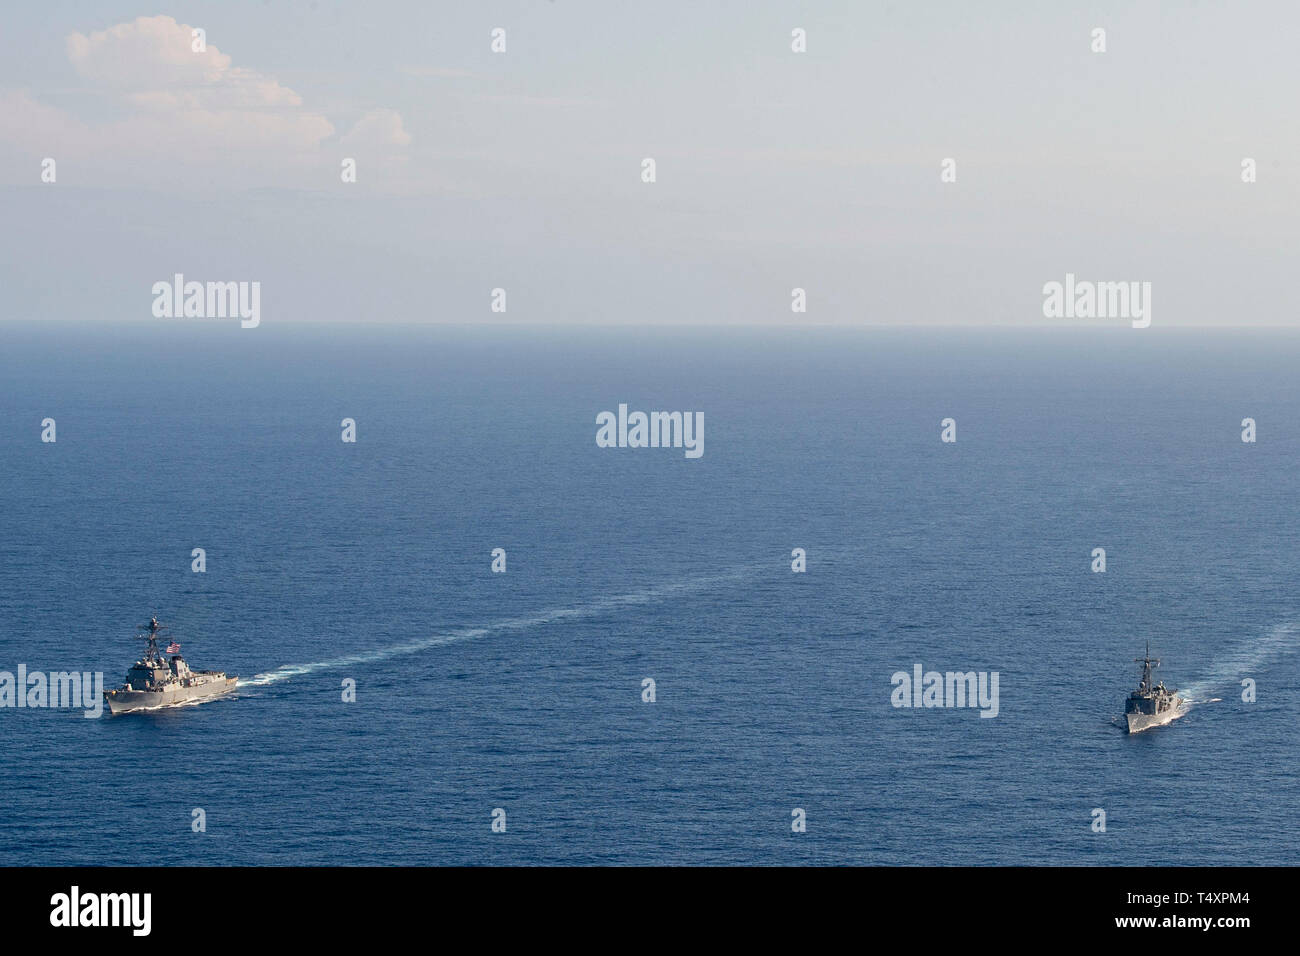 190418-N-UI104-0610     PHILIPPINE SEA (April 18, 2019) The Arleigh Burke-class guided-missile destroyer USS Preble (DDG 88) and the Royal Australian Navy Adelaide-class guided-missile frigate HMAS Melbourne (FFG 05) transit in formation during a cooperative deployment. Preble and Melbourne are participating in a cooperative deployment in order to improve on maritime capabilities between partners.  Preble is deployed to the U.S 7th Fleet area of operations in support of security and stability in the Indo-Pacific region. (U.S. Navy photo by Mass Communication Specialist 1st Class Bryan Niegel/R Stock Photo